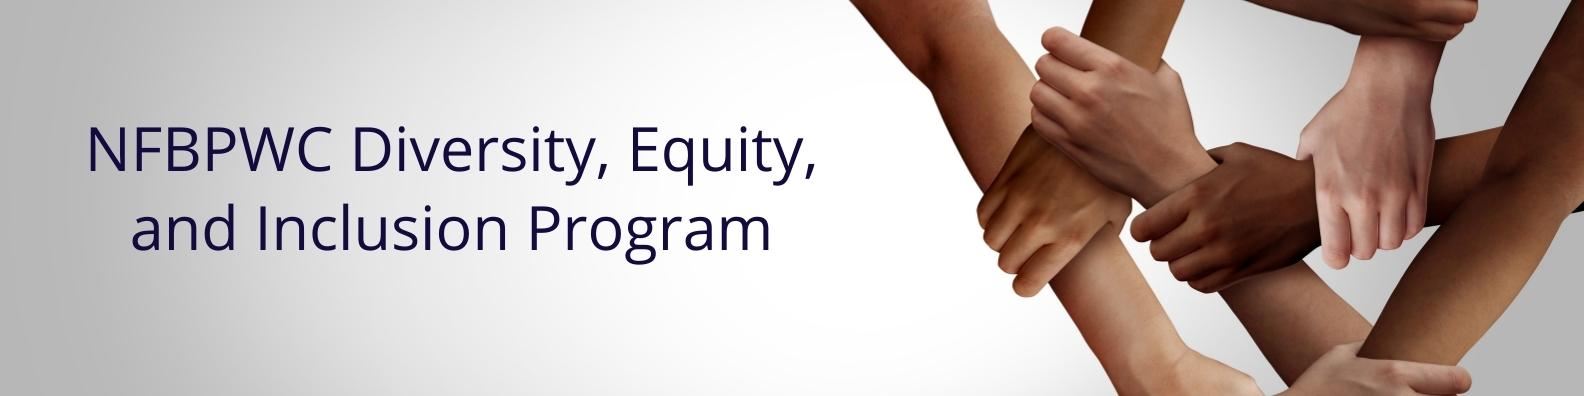 Diversity Equity and Inclusion Program